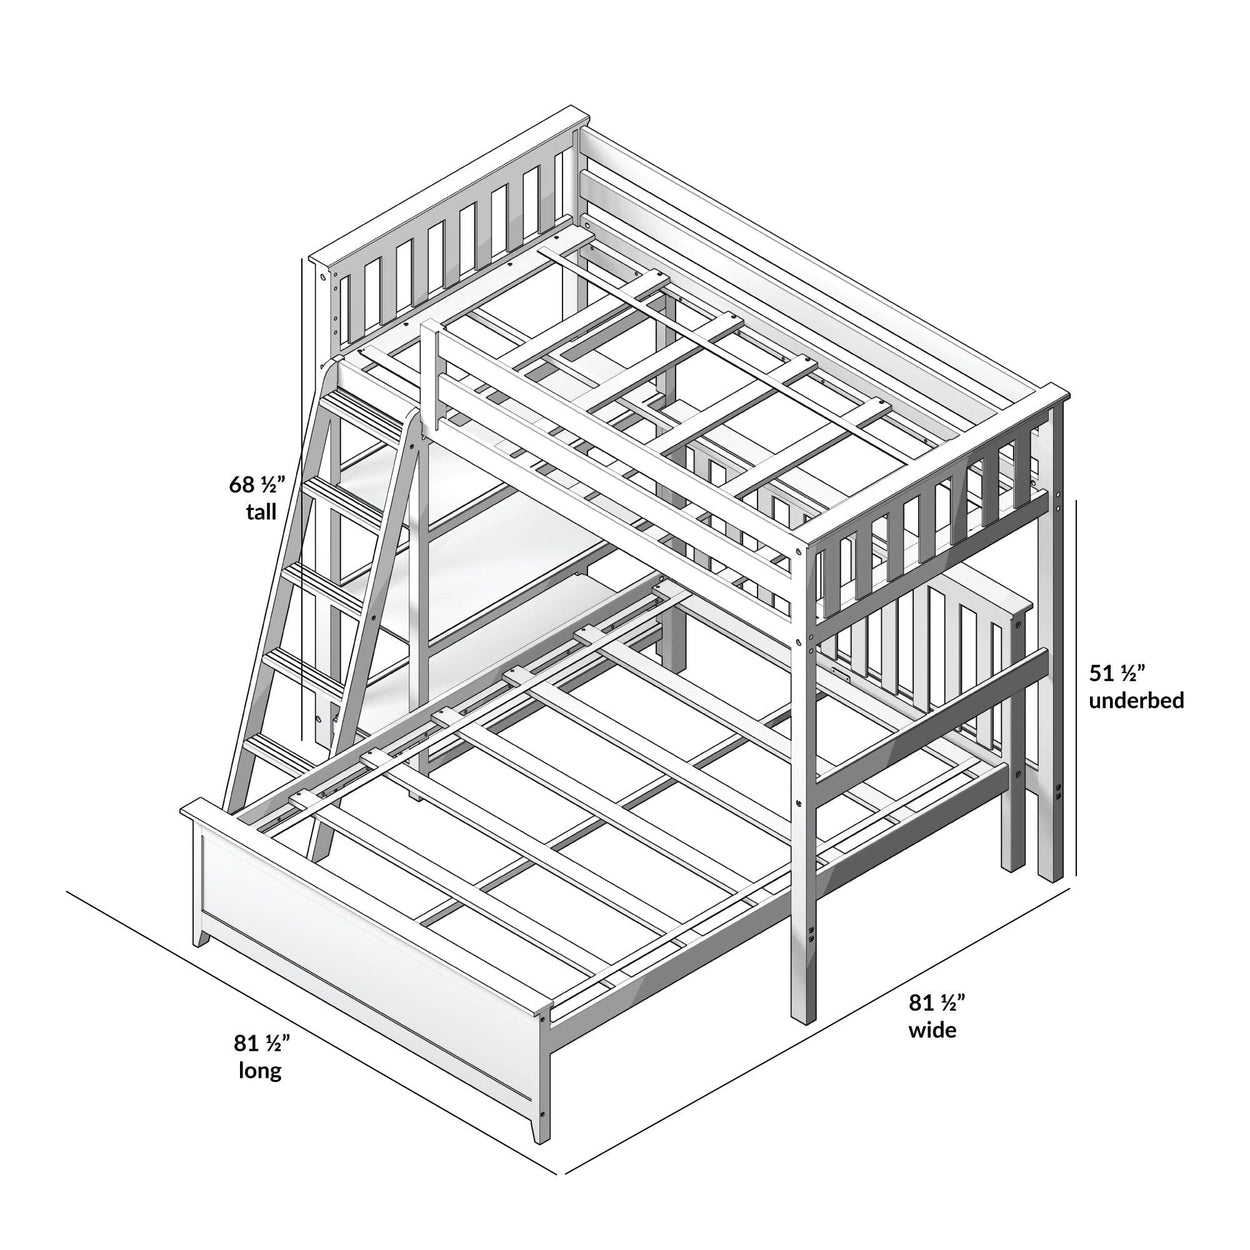 18-912-121 : Bunk Beds L-Shaped Twin over Full Bunk Bed with Bookcase, Grey